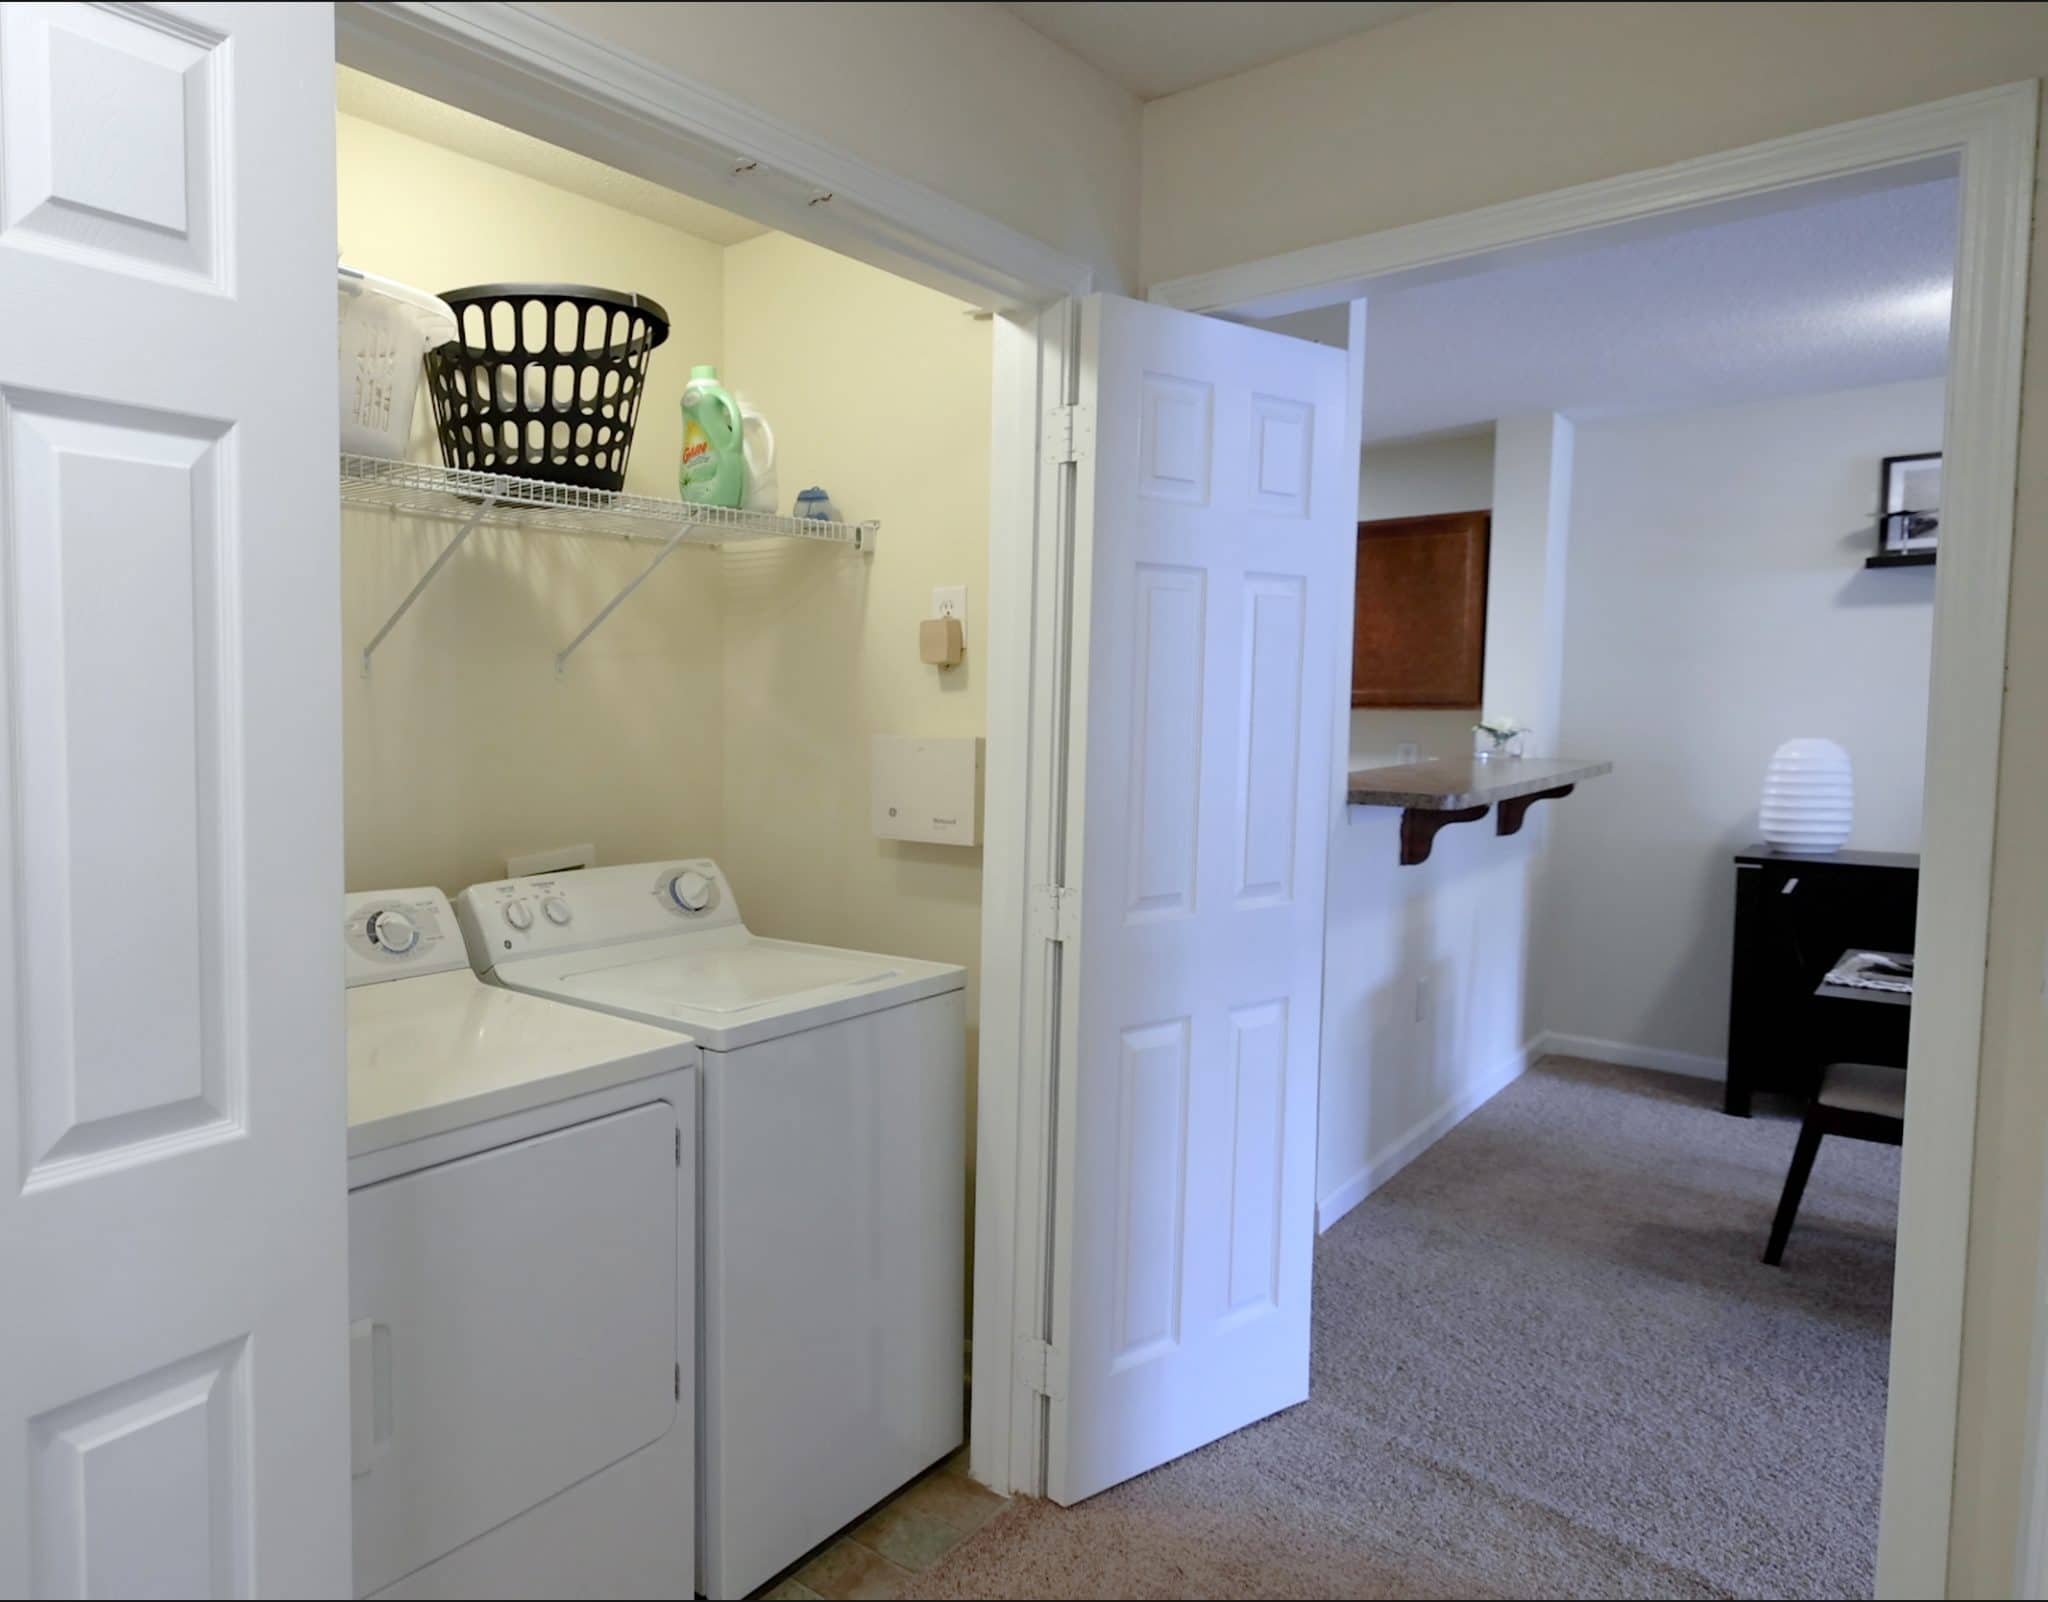 Three Bedroom Apartments in Fayetteville NC